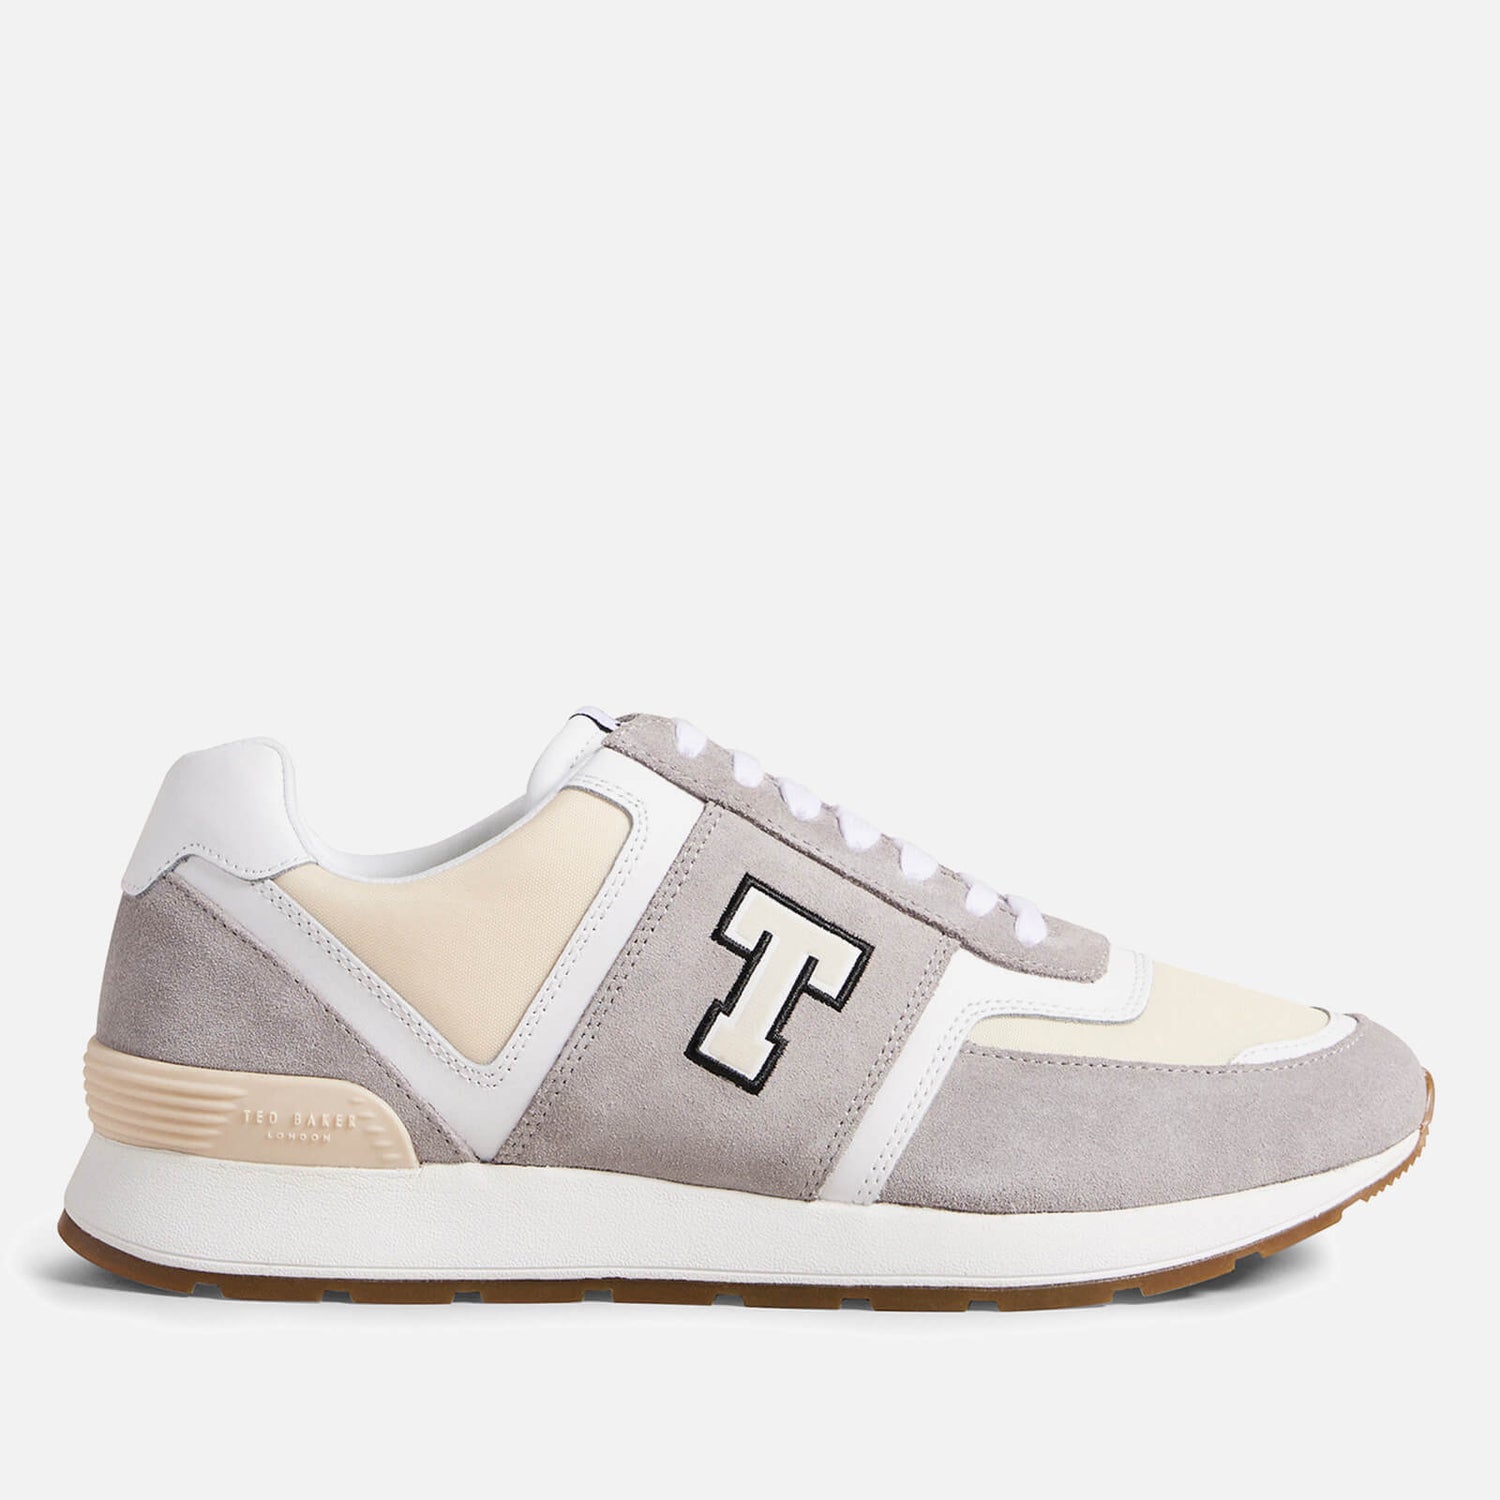 Ted Baker Gregory Retro T Suede Running Style Trainers - UK 7